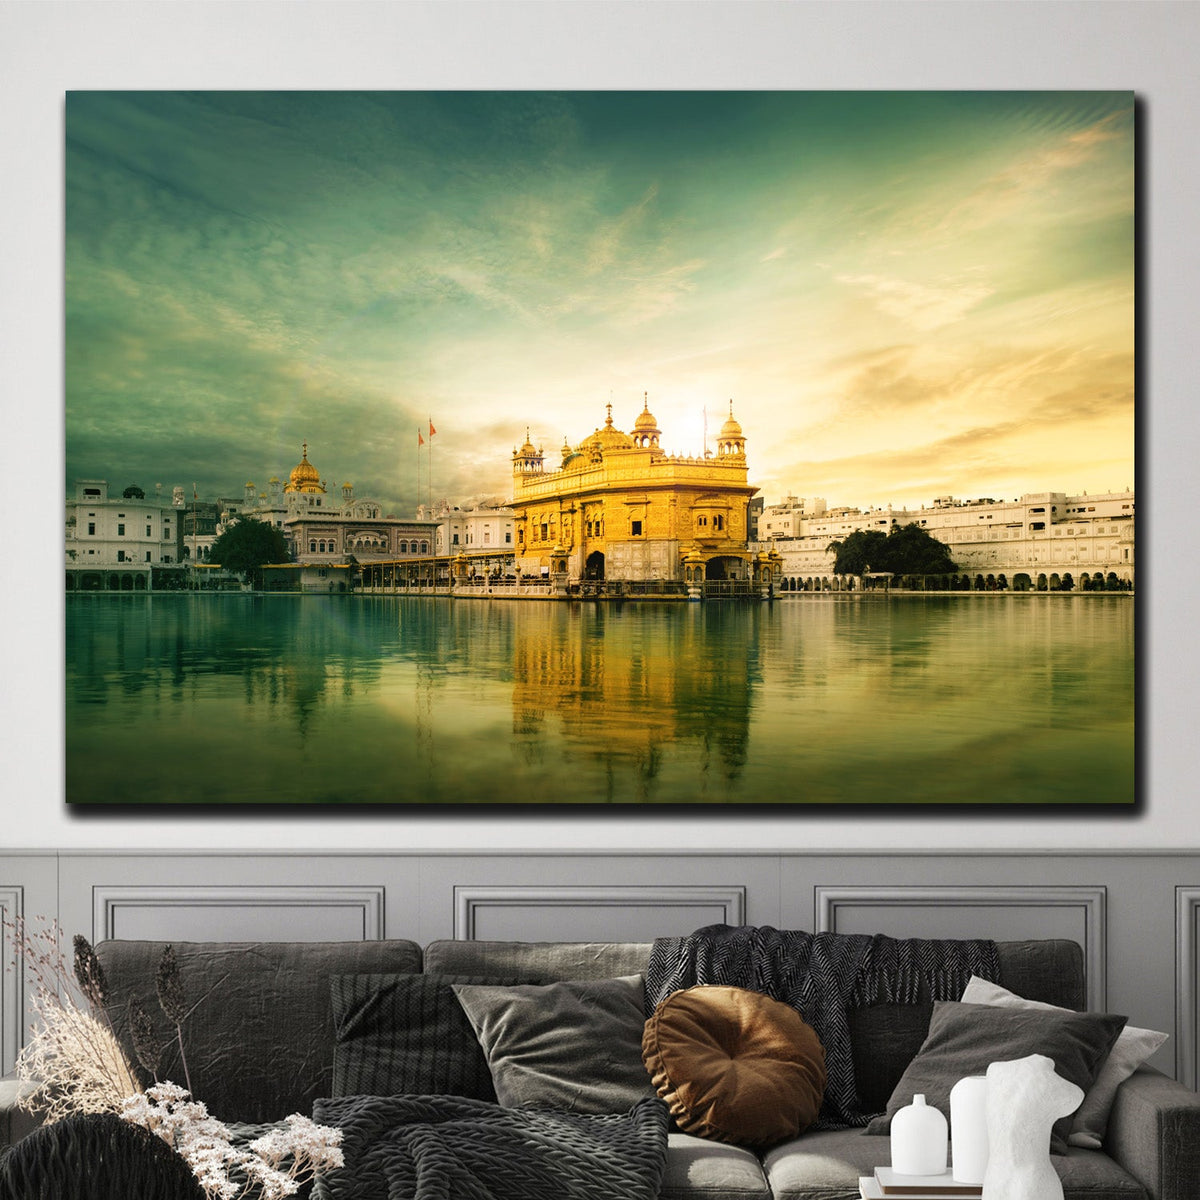 https://cdn.shopify.com/s/files/1/0387/9986/8044/products/GoldenTempleSkylineCanvasArtprintStretched-2.jpg